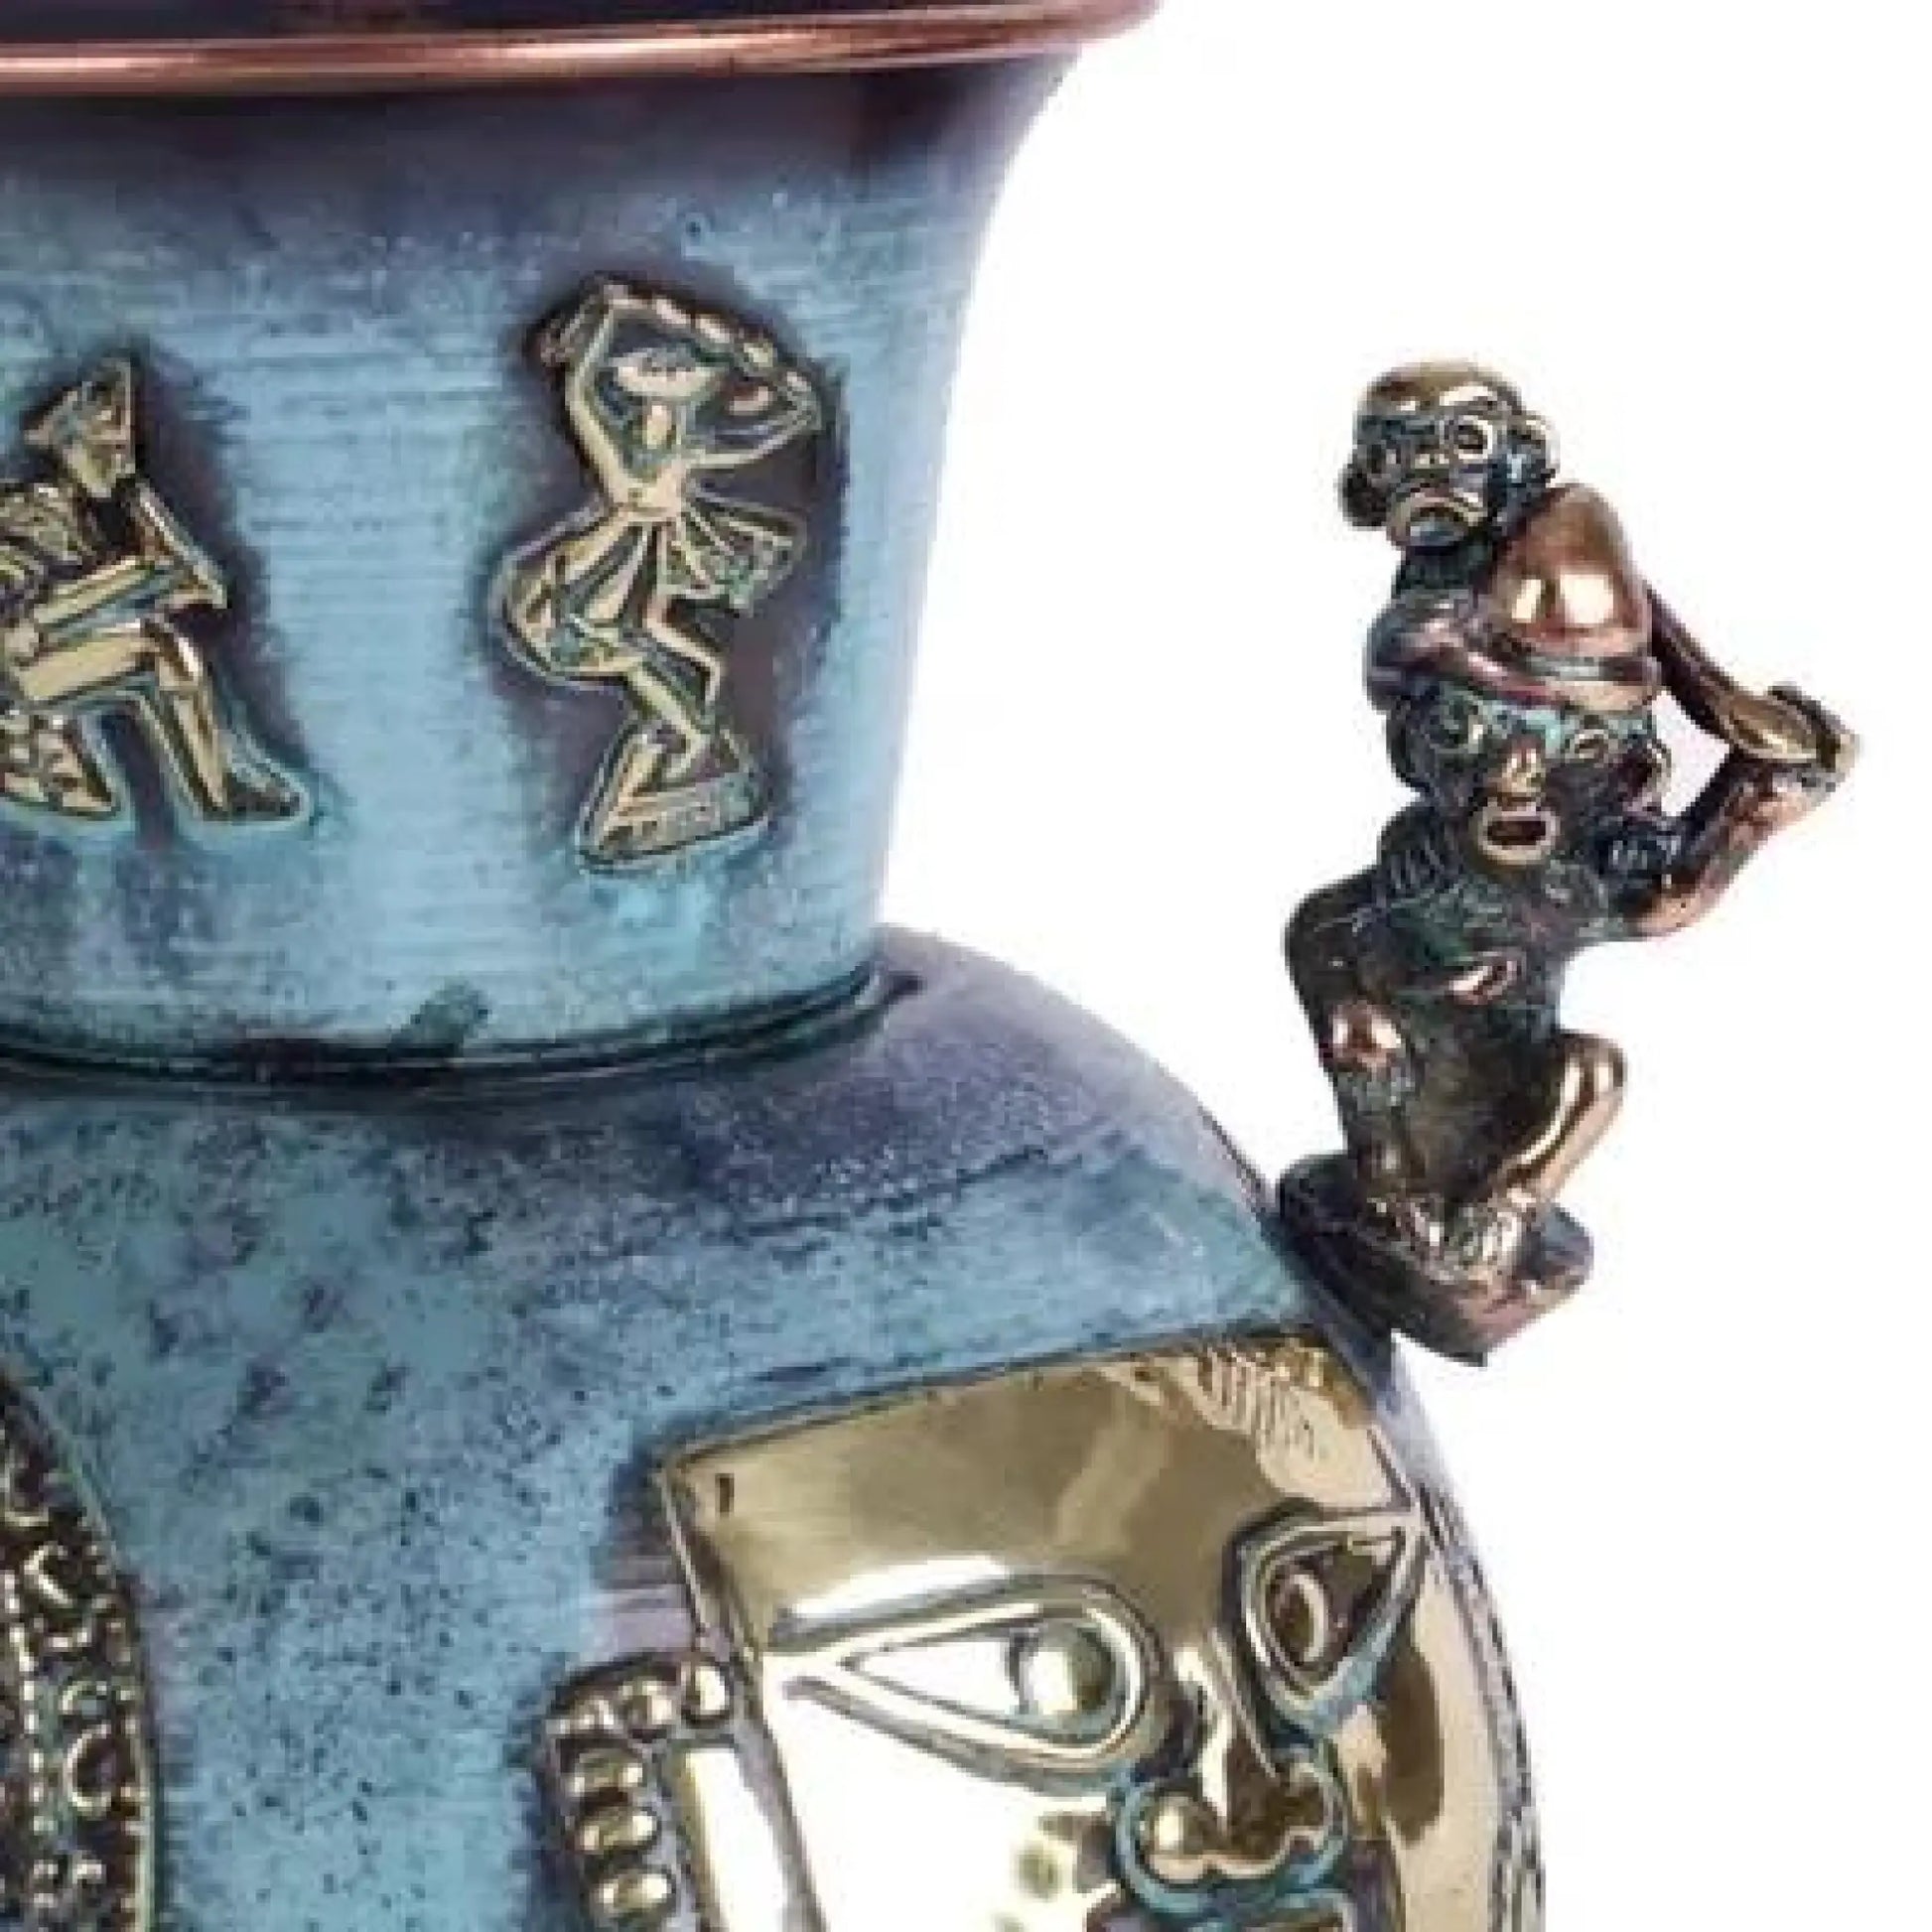 History of Warriors - Copper and Bronze Vase from Peru - Art